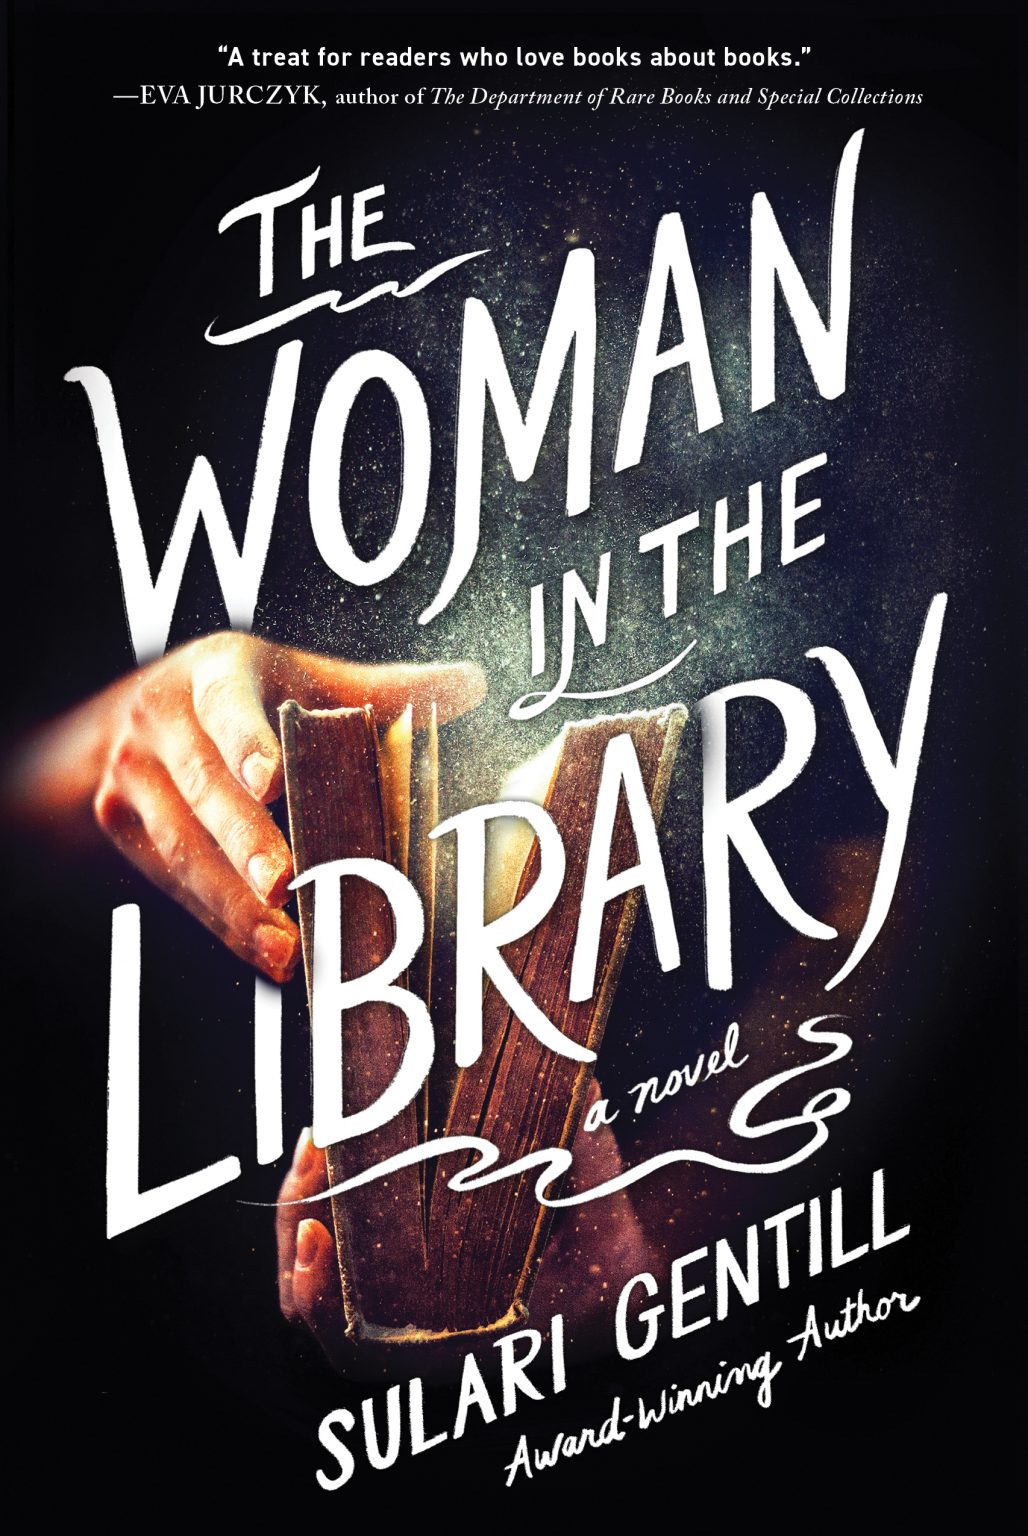 One of our recommended books is The Woman in the Library by Sulari Gentill